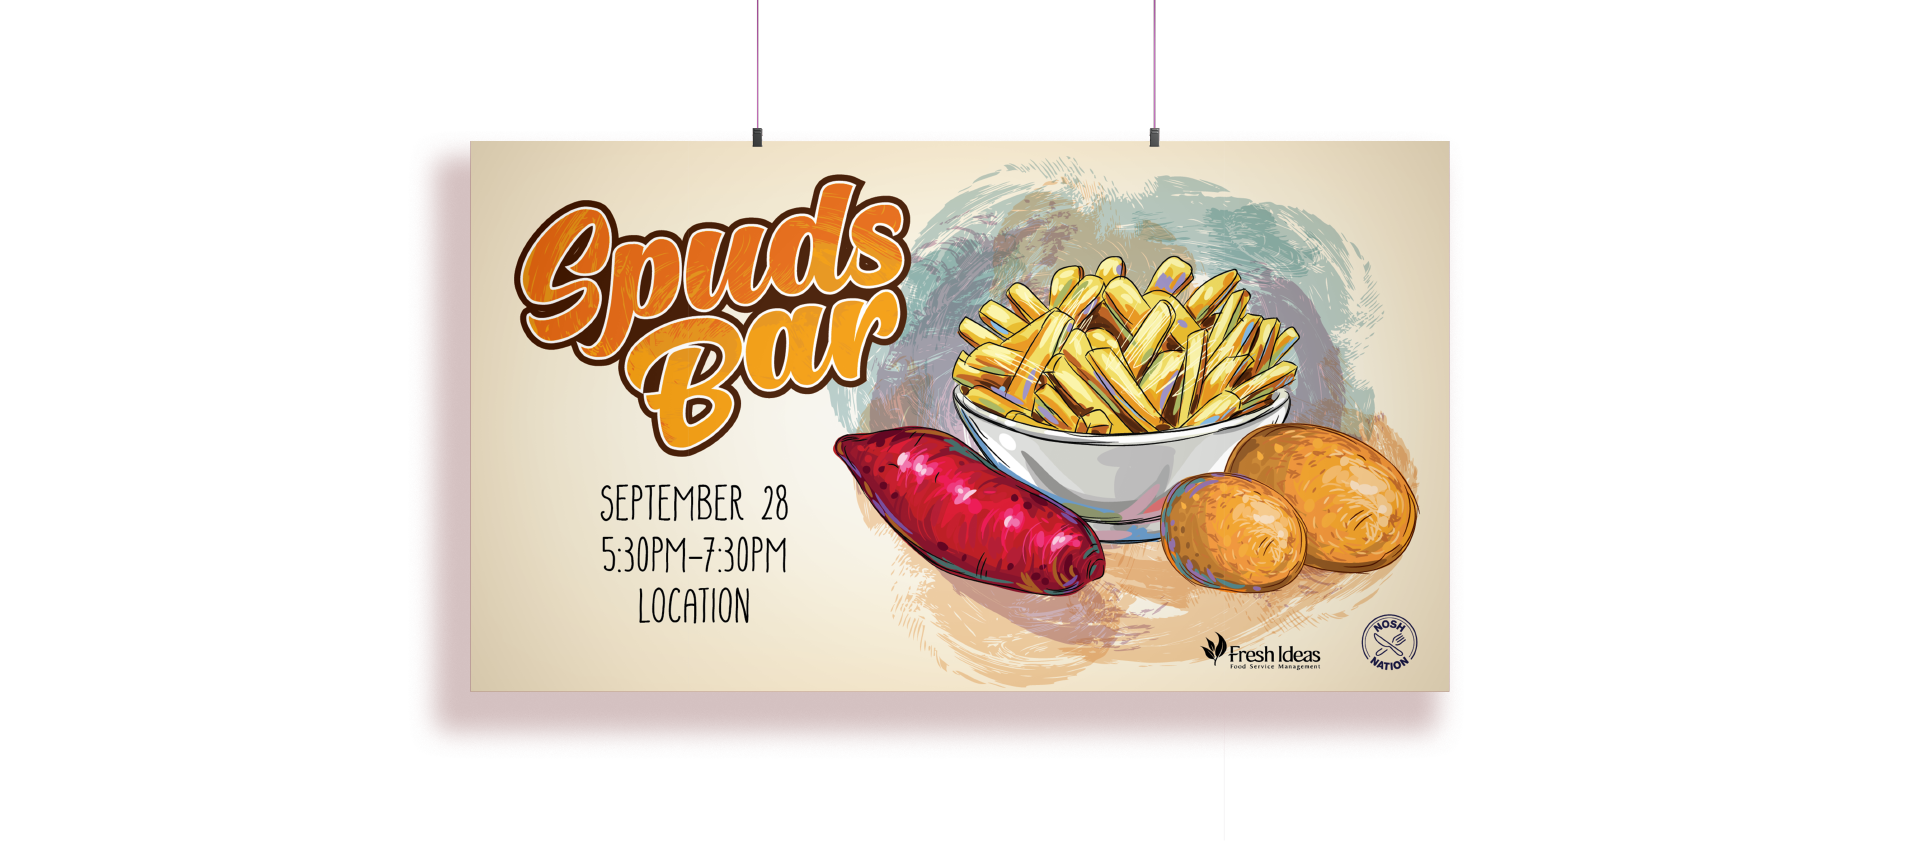 Horizontal poster advertising a Spuds Bar event